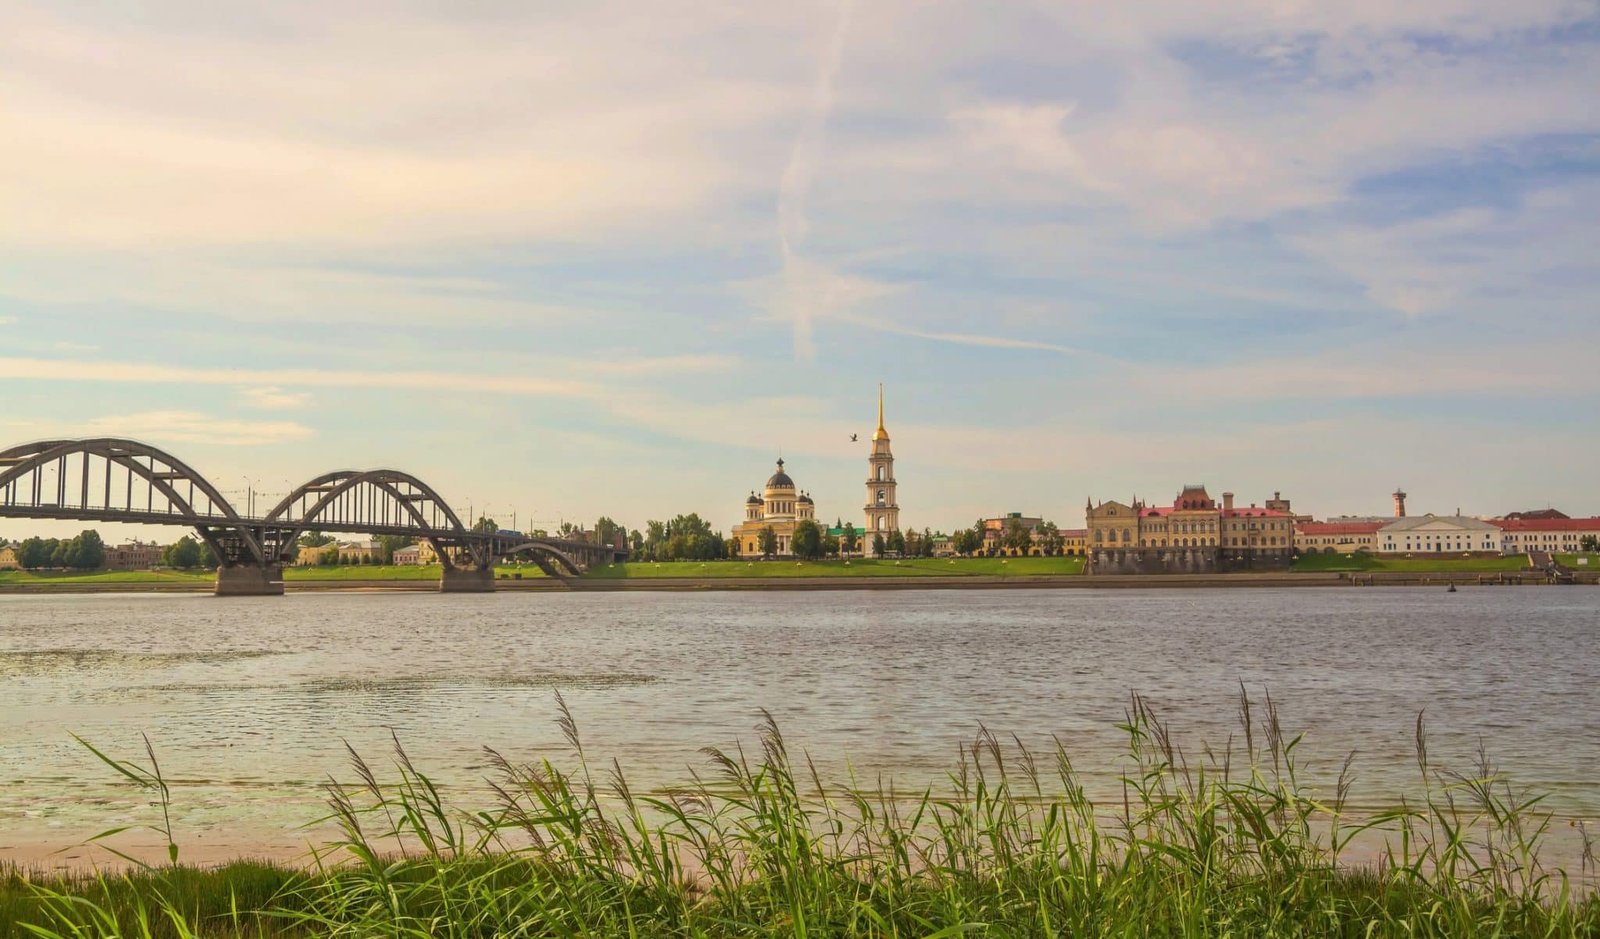 The ancient Russian city of Rybinsk on the banks of the Volga River